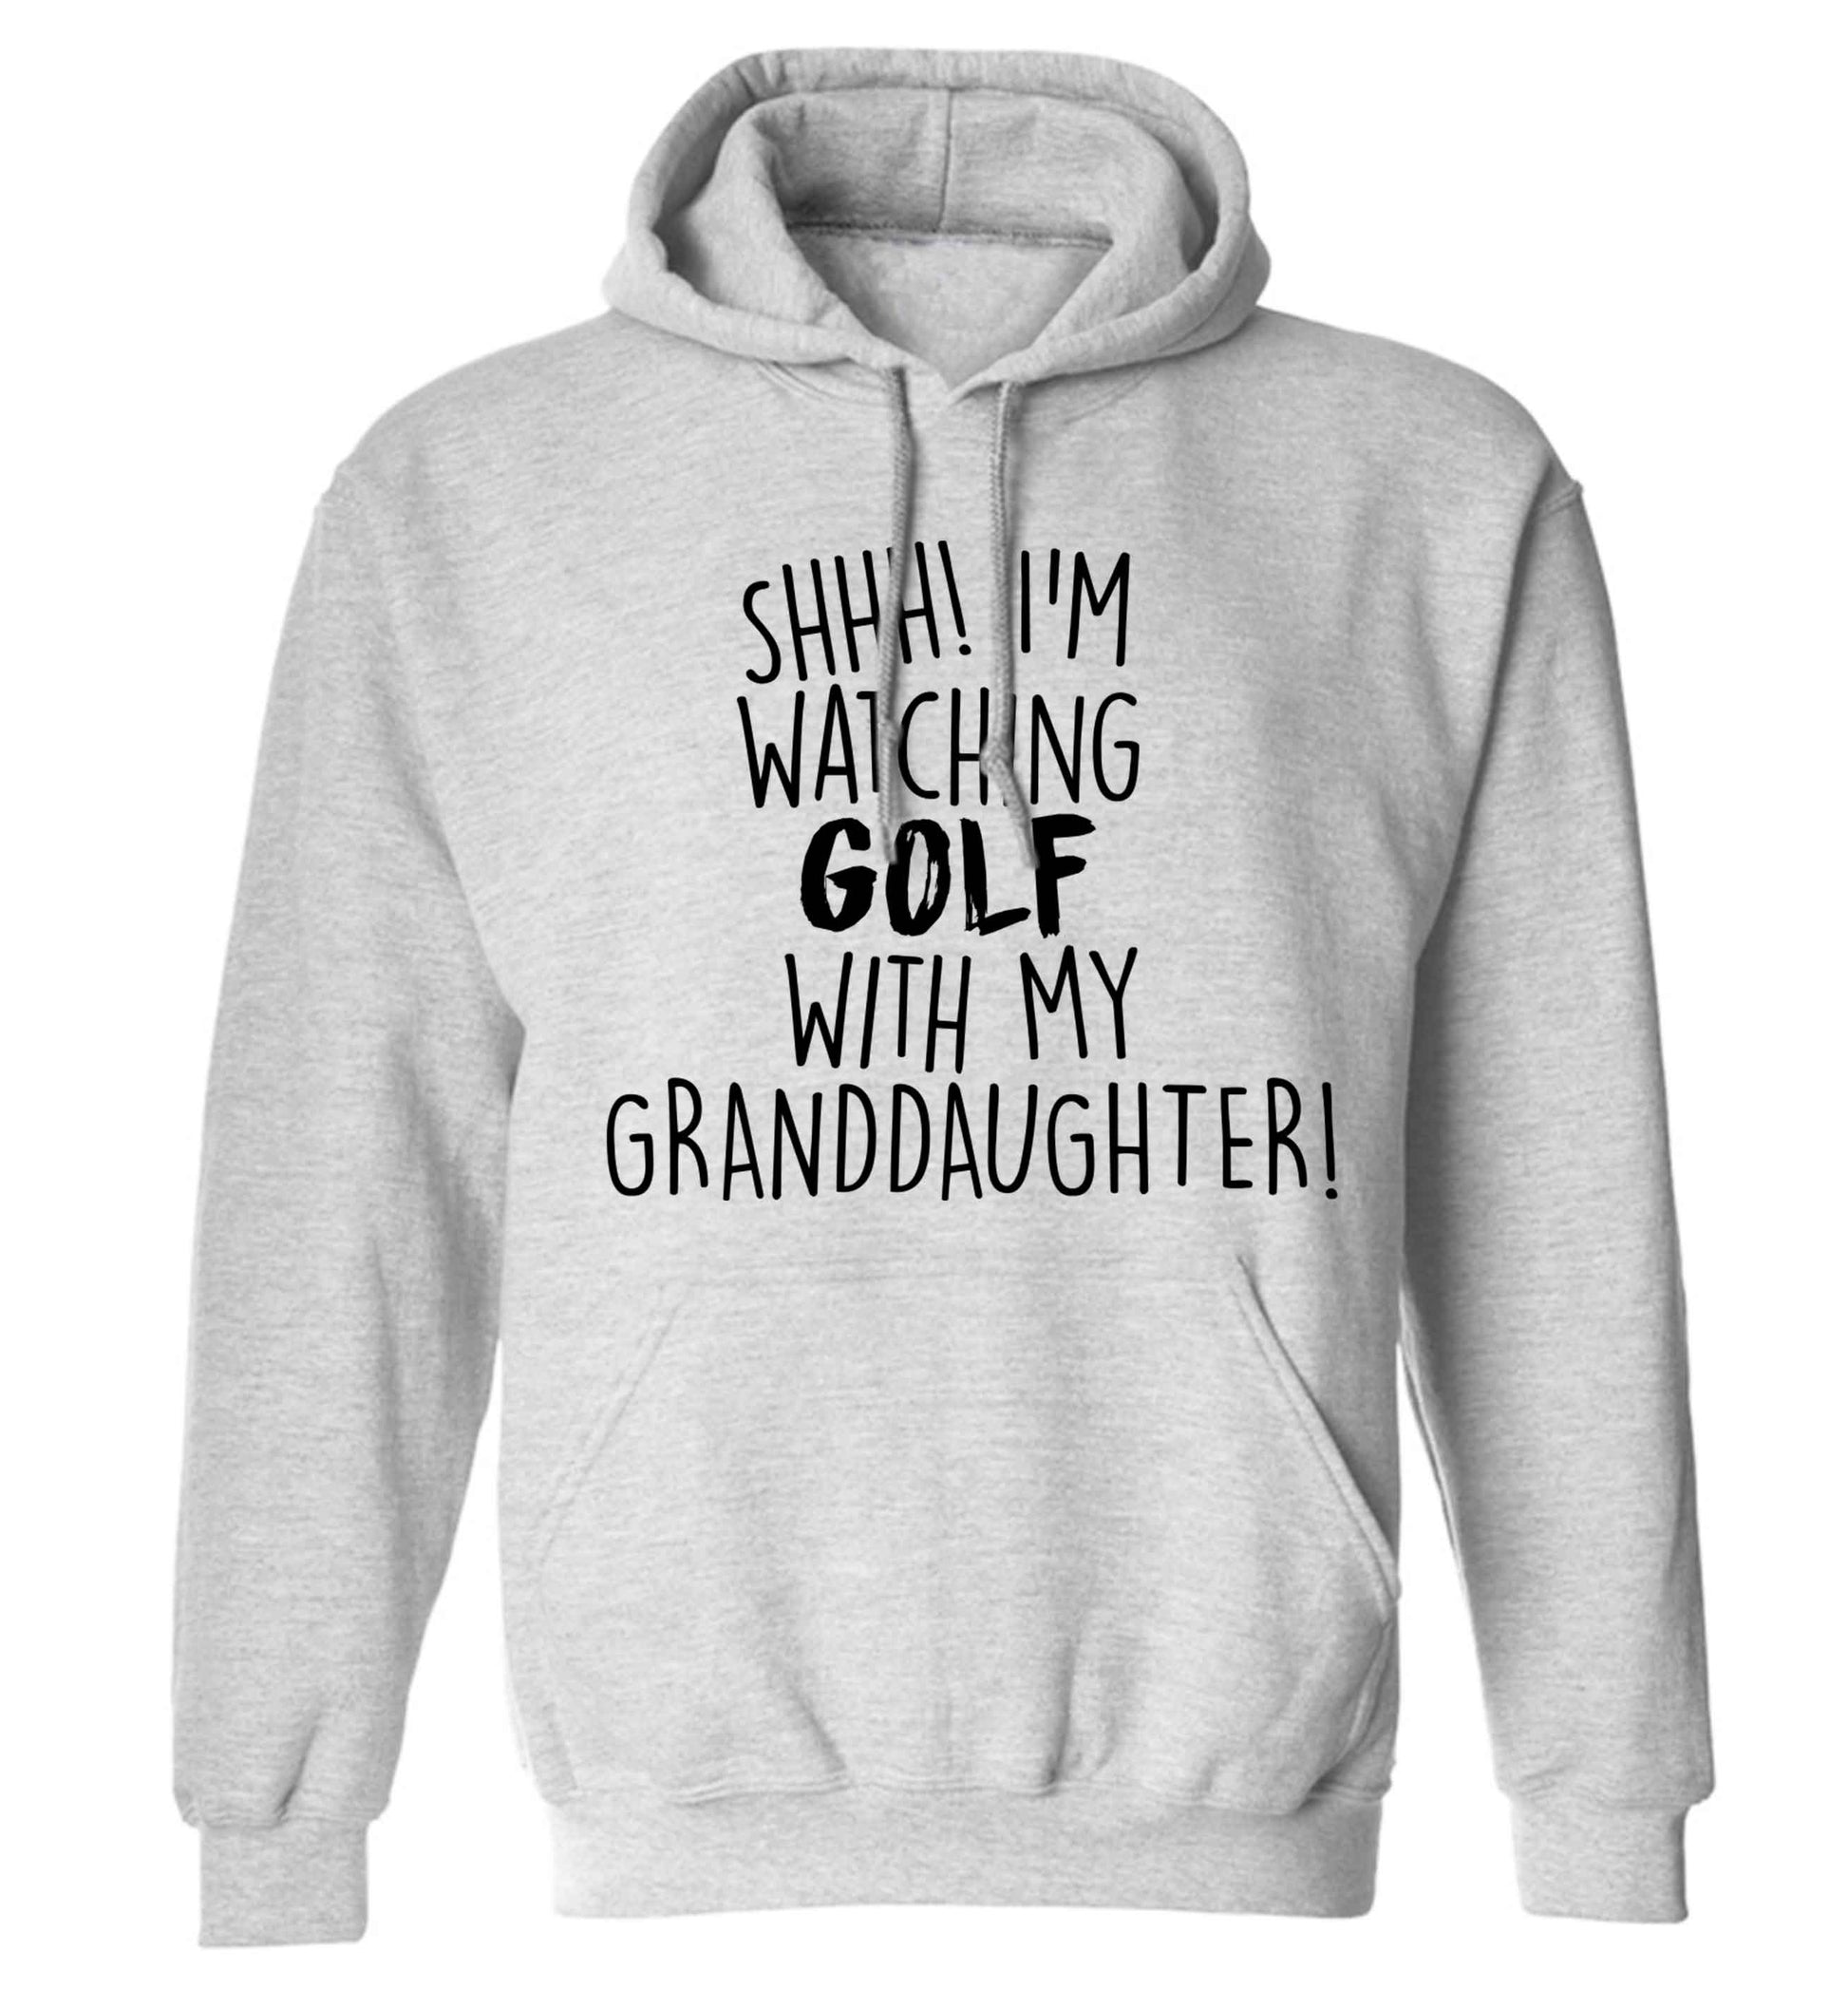 Shh I'm watching golf with my granddaughter adults unisex grey hoodie 2XL